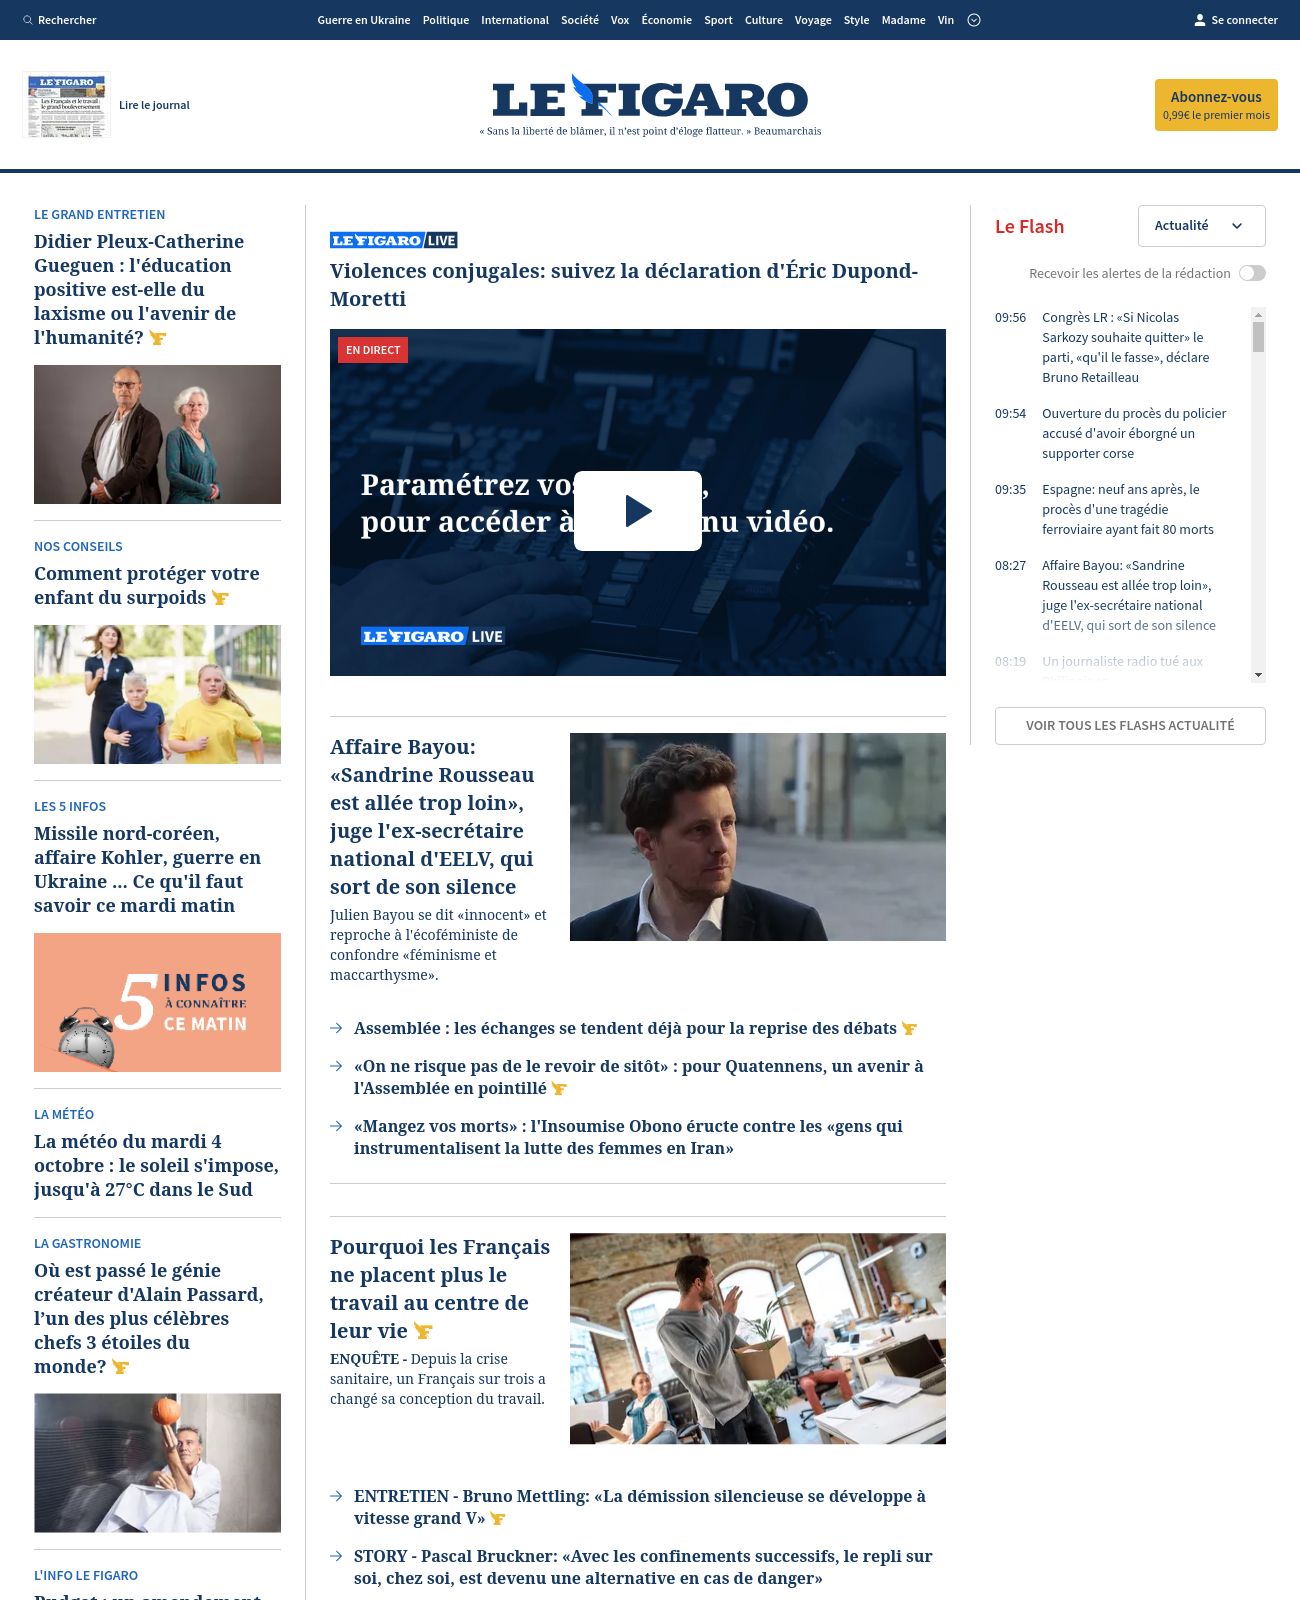 Le Figaro at 2022-10-04 10:19:19+02:00 local time